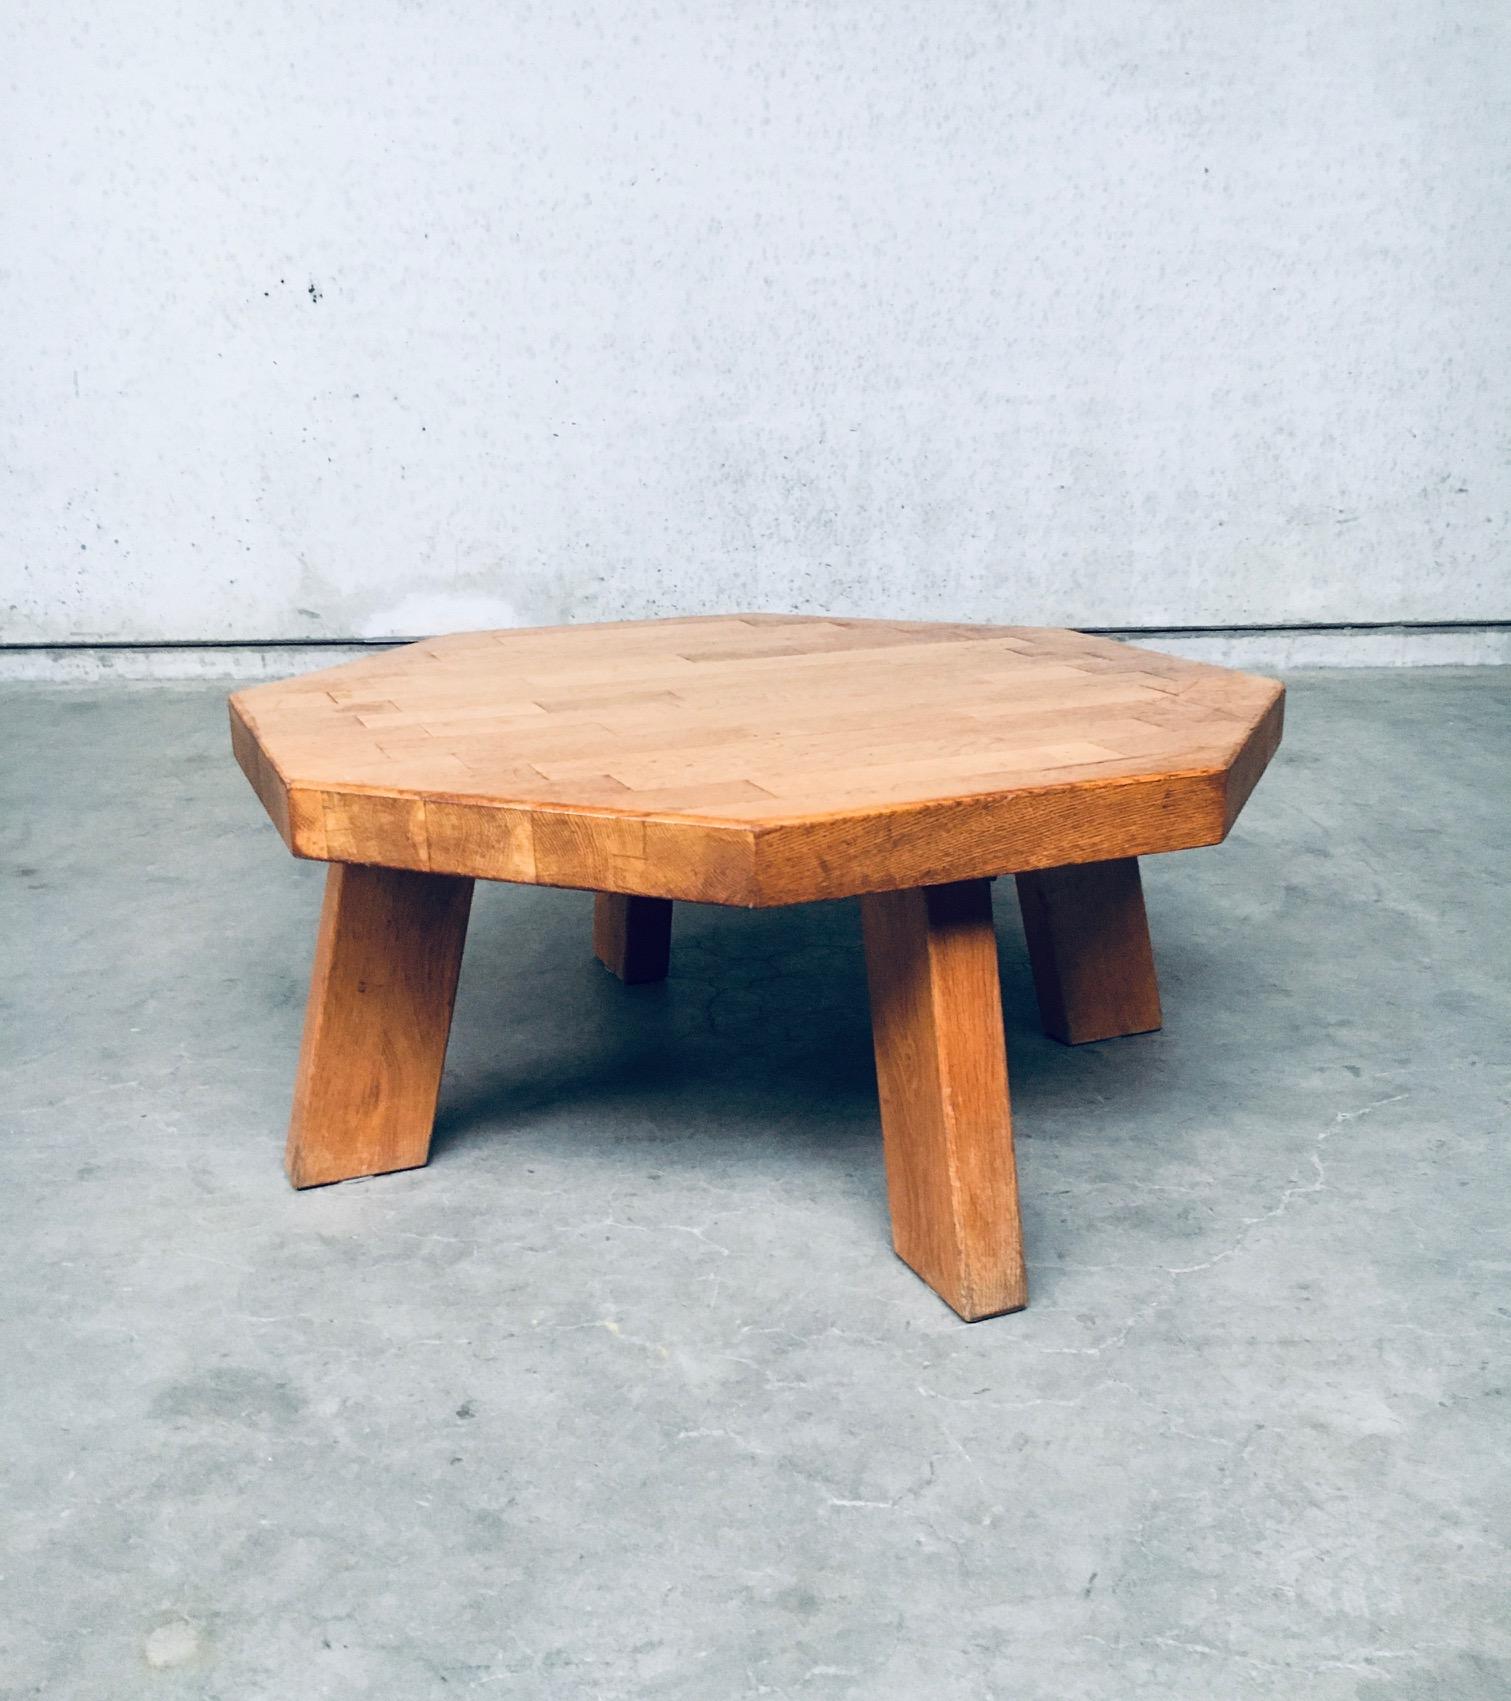 Vintage mid-century Dutch Brutalist design solid oak octagonal coffee table by Meubelfabriek Oisterwijk, made in the Netherlands in the 1960's period. In the style of Charlotte Perriand / Pierre Jeanneret. Solid oak constructed heavy coffee table.